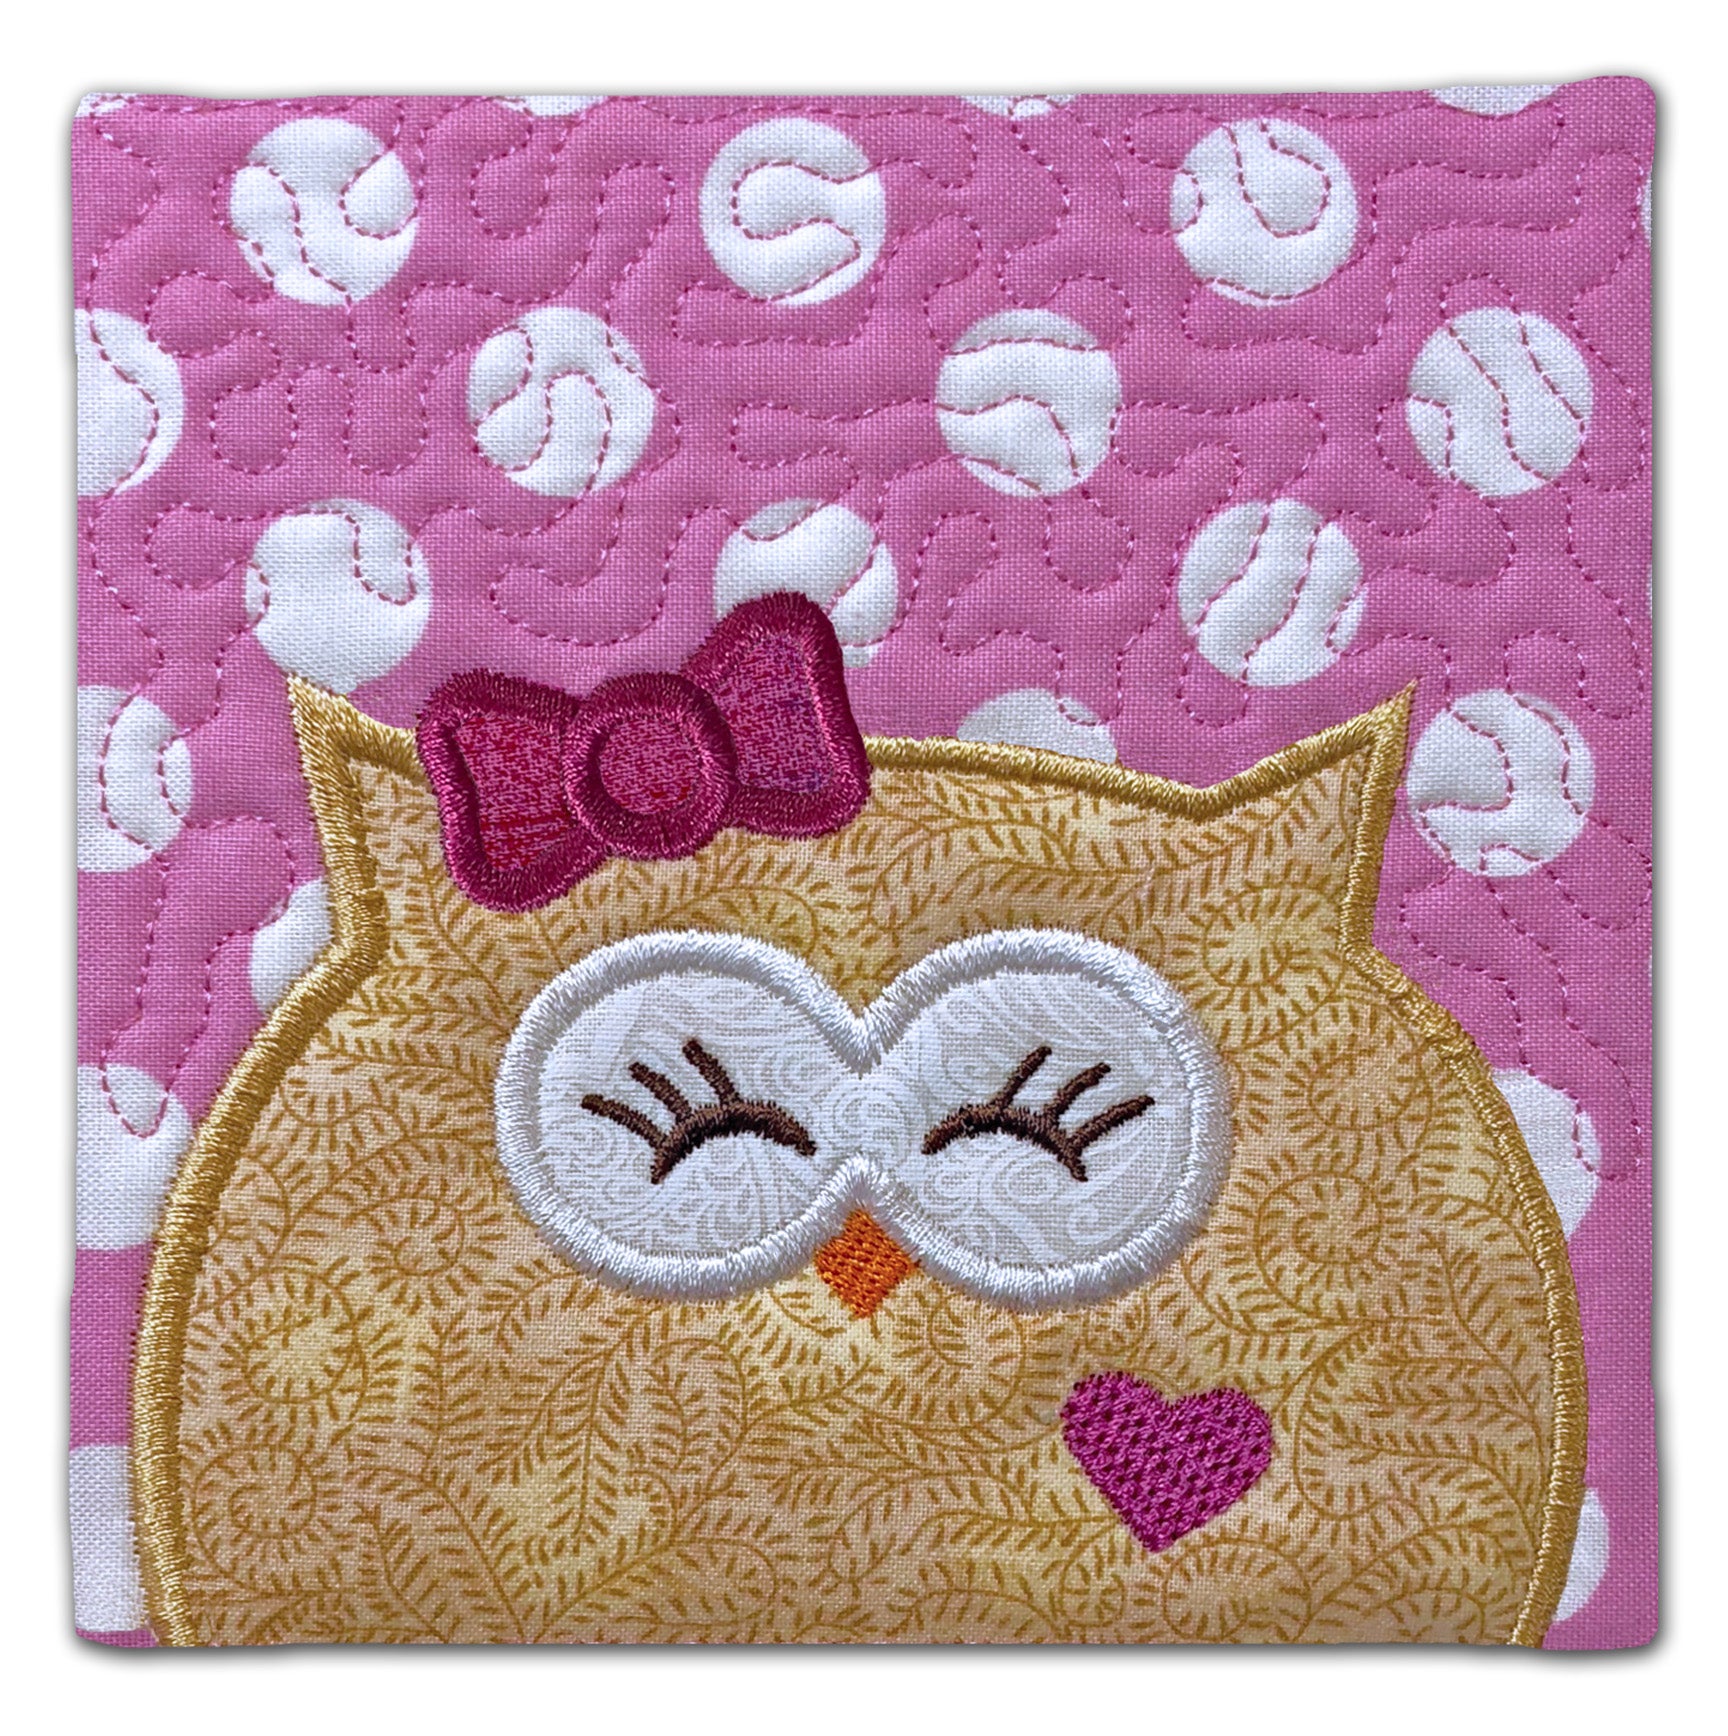 Owl Always Love You In the Hoop Quilt Block Projects Embroidery Design Download 